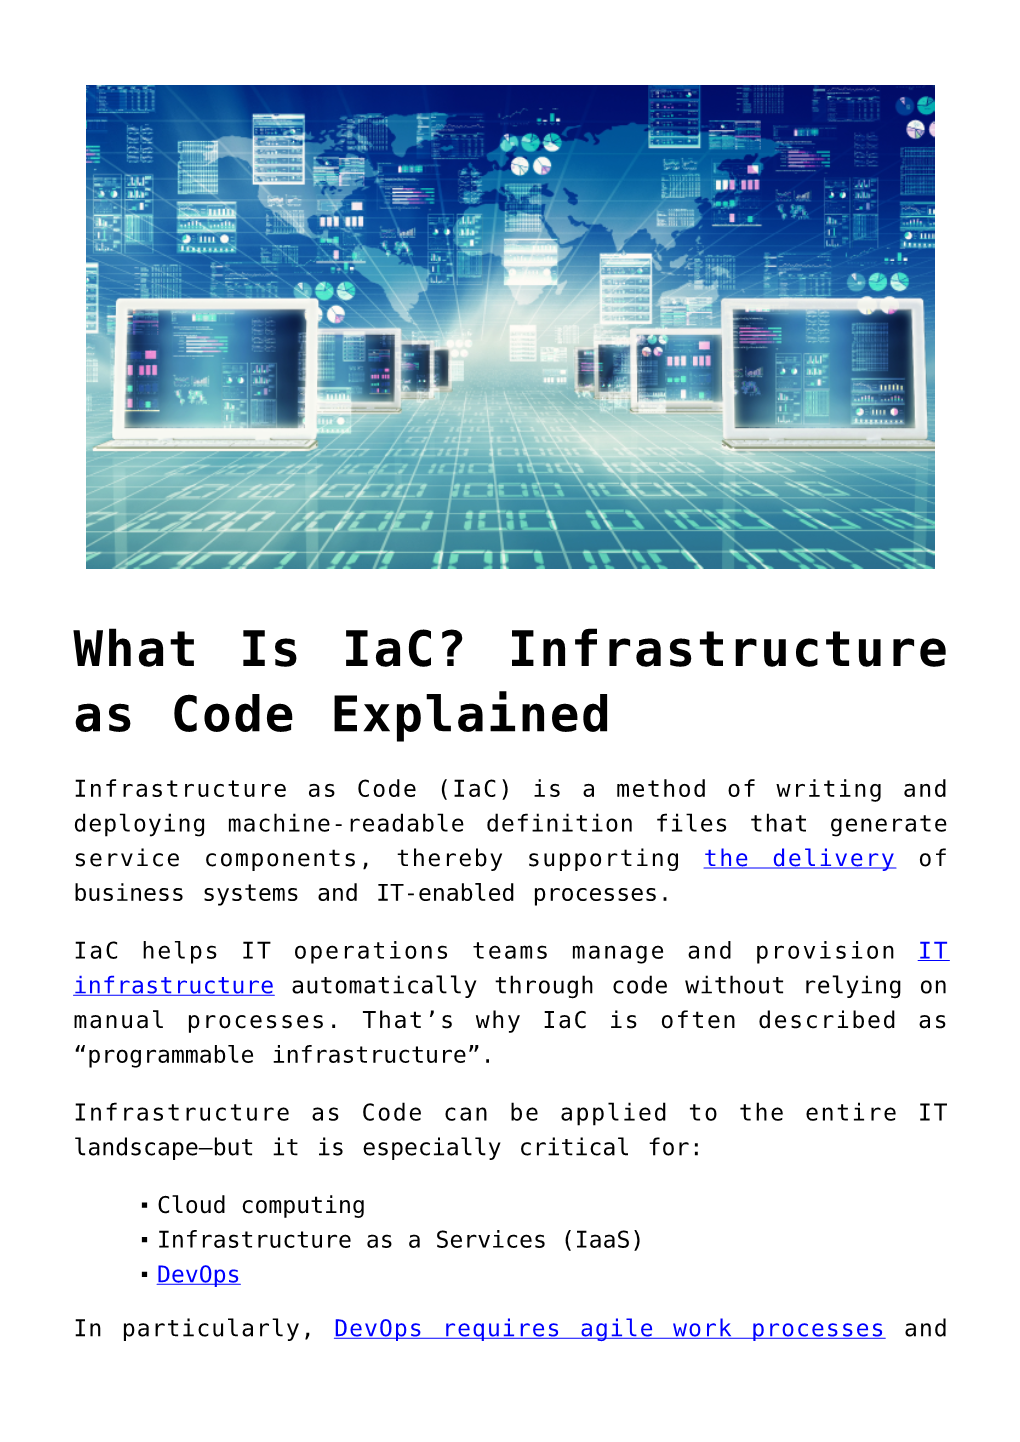 What Is Iac? Infrastructure As Code Explained